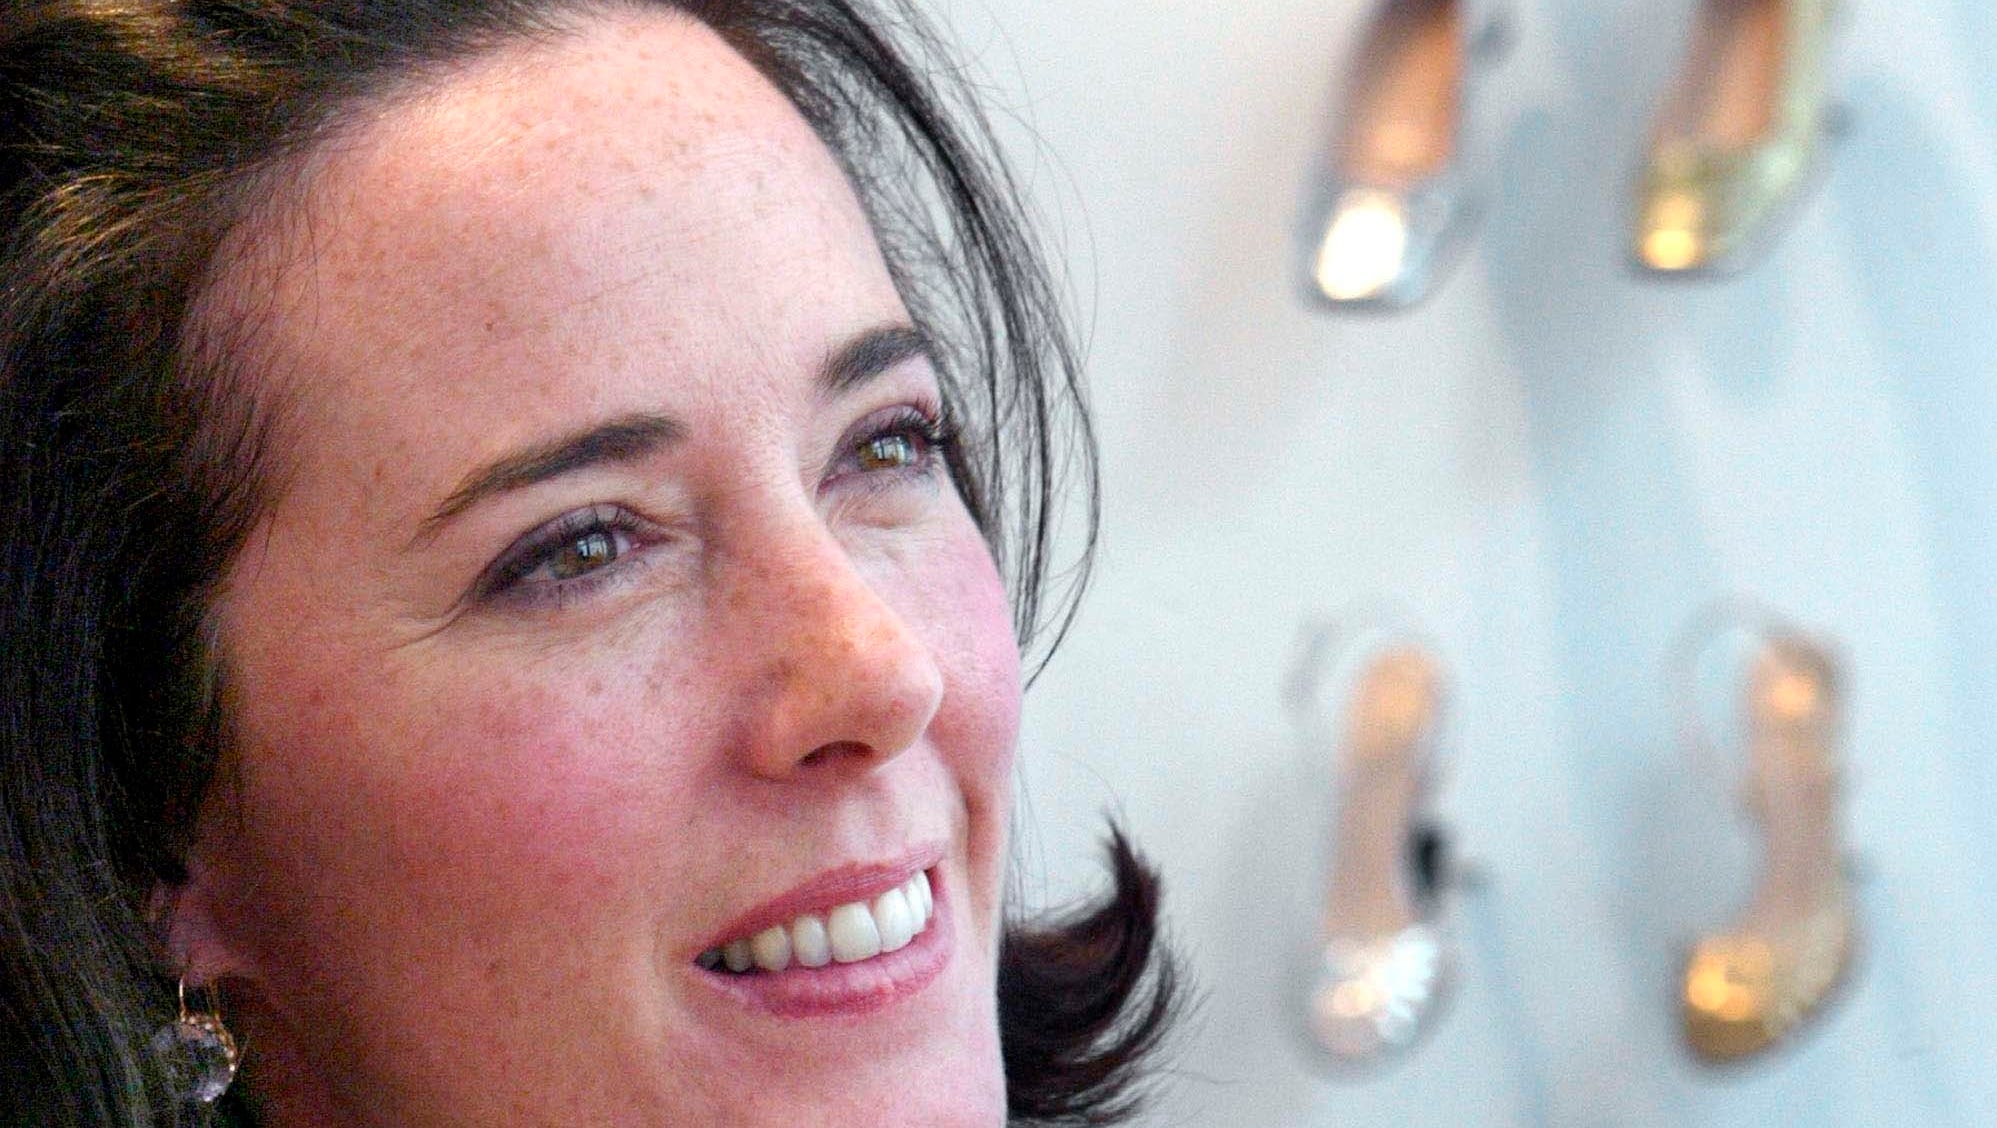 Kate Spade: wife of Andy Spade, 1 daughter, facts about the designer